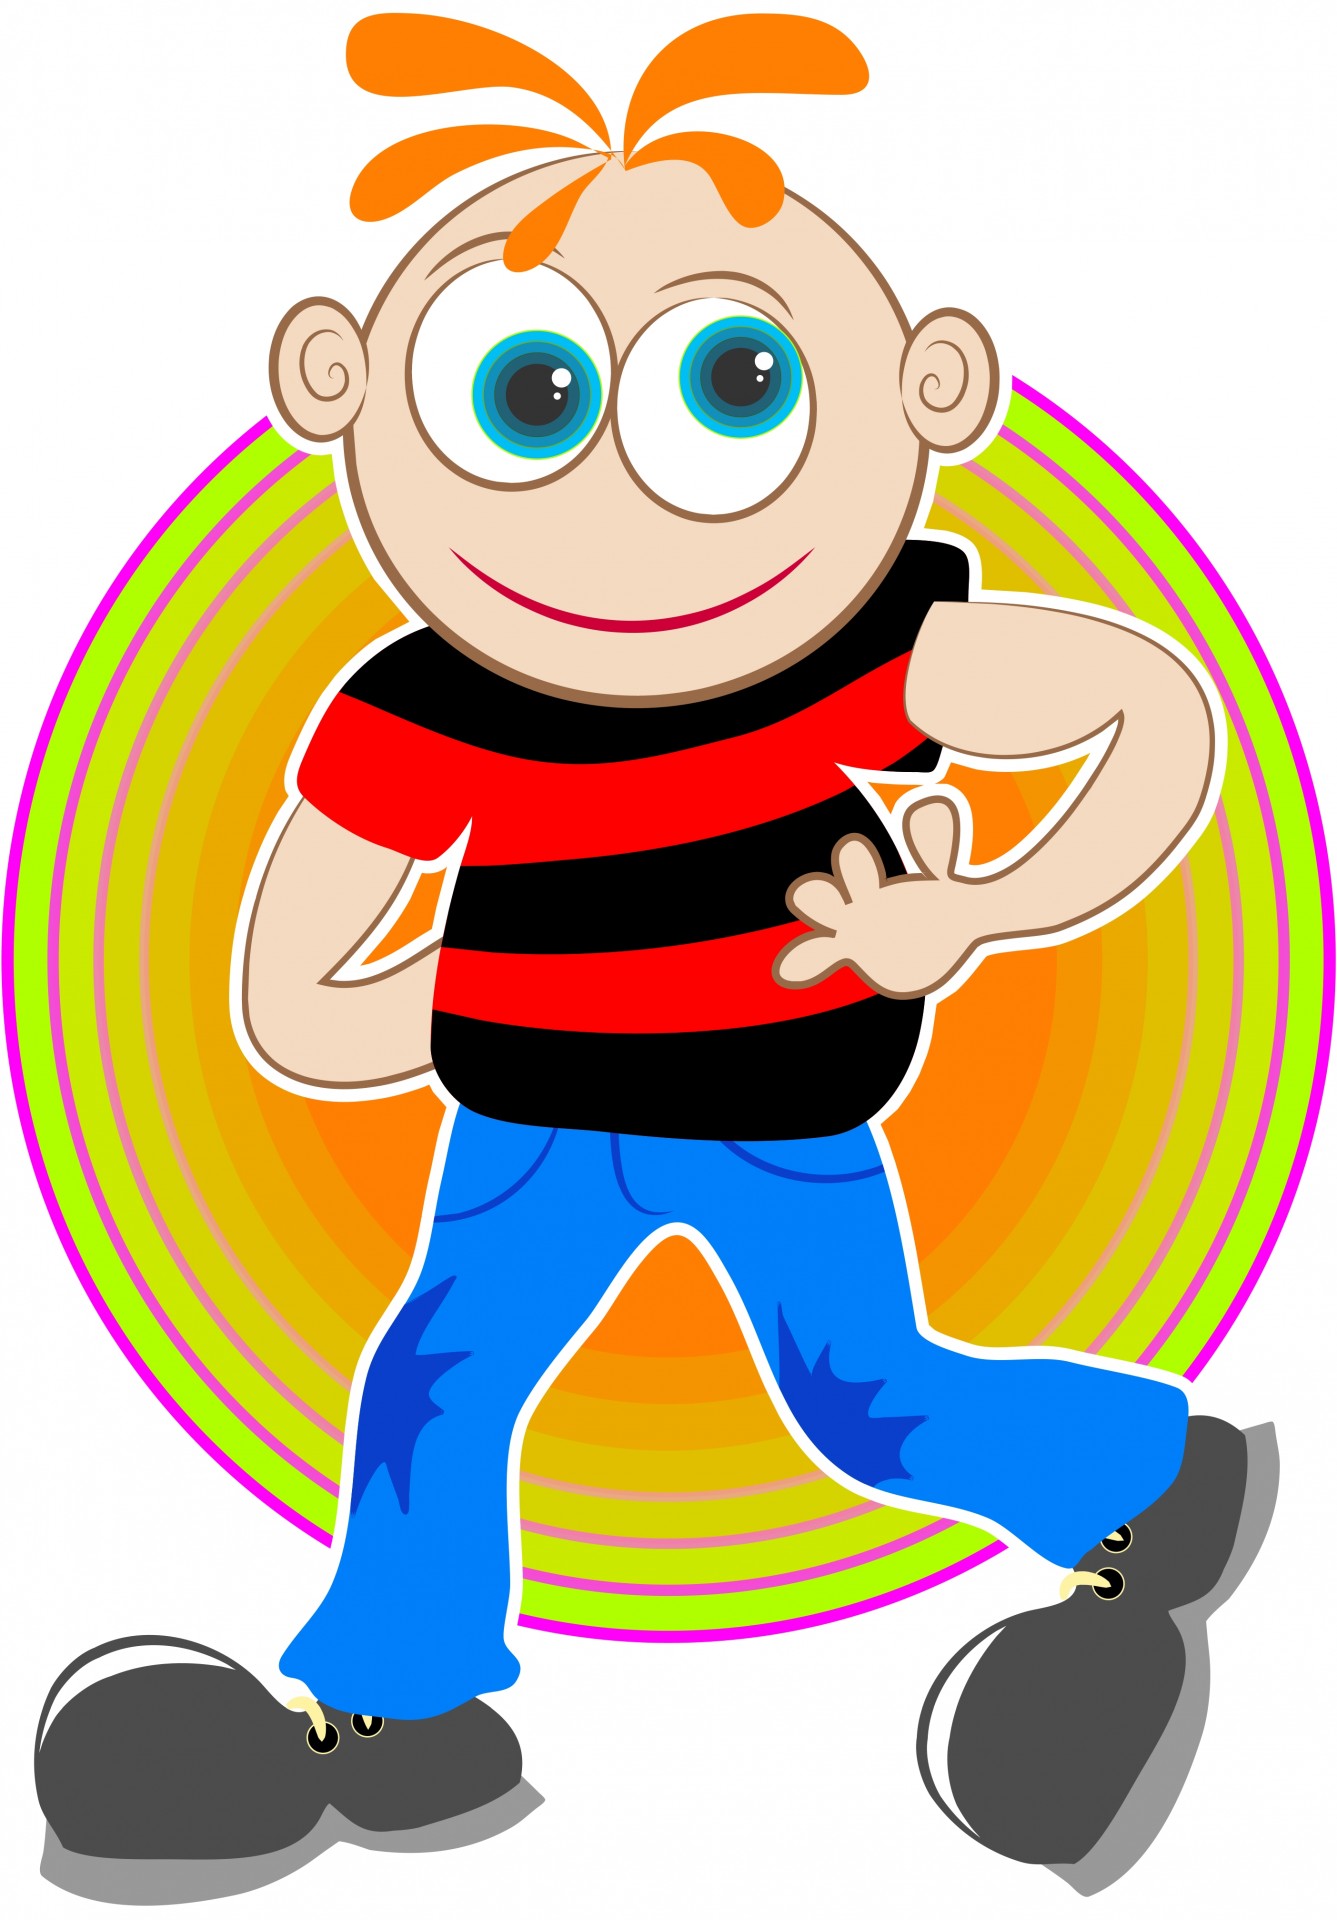 Groovy free stock photo. Boy clipart person